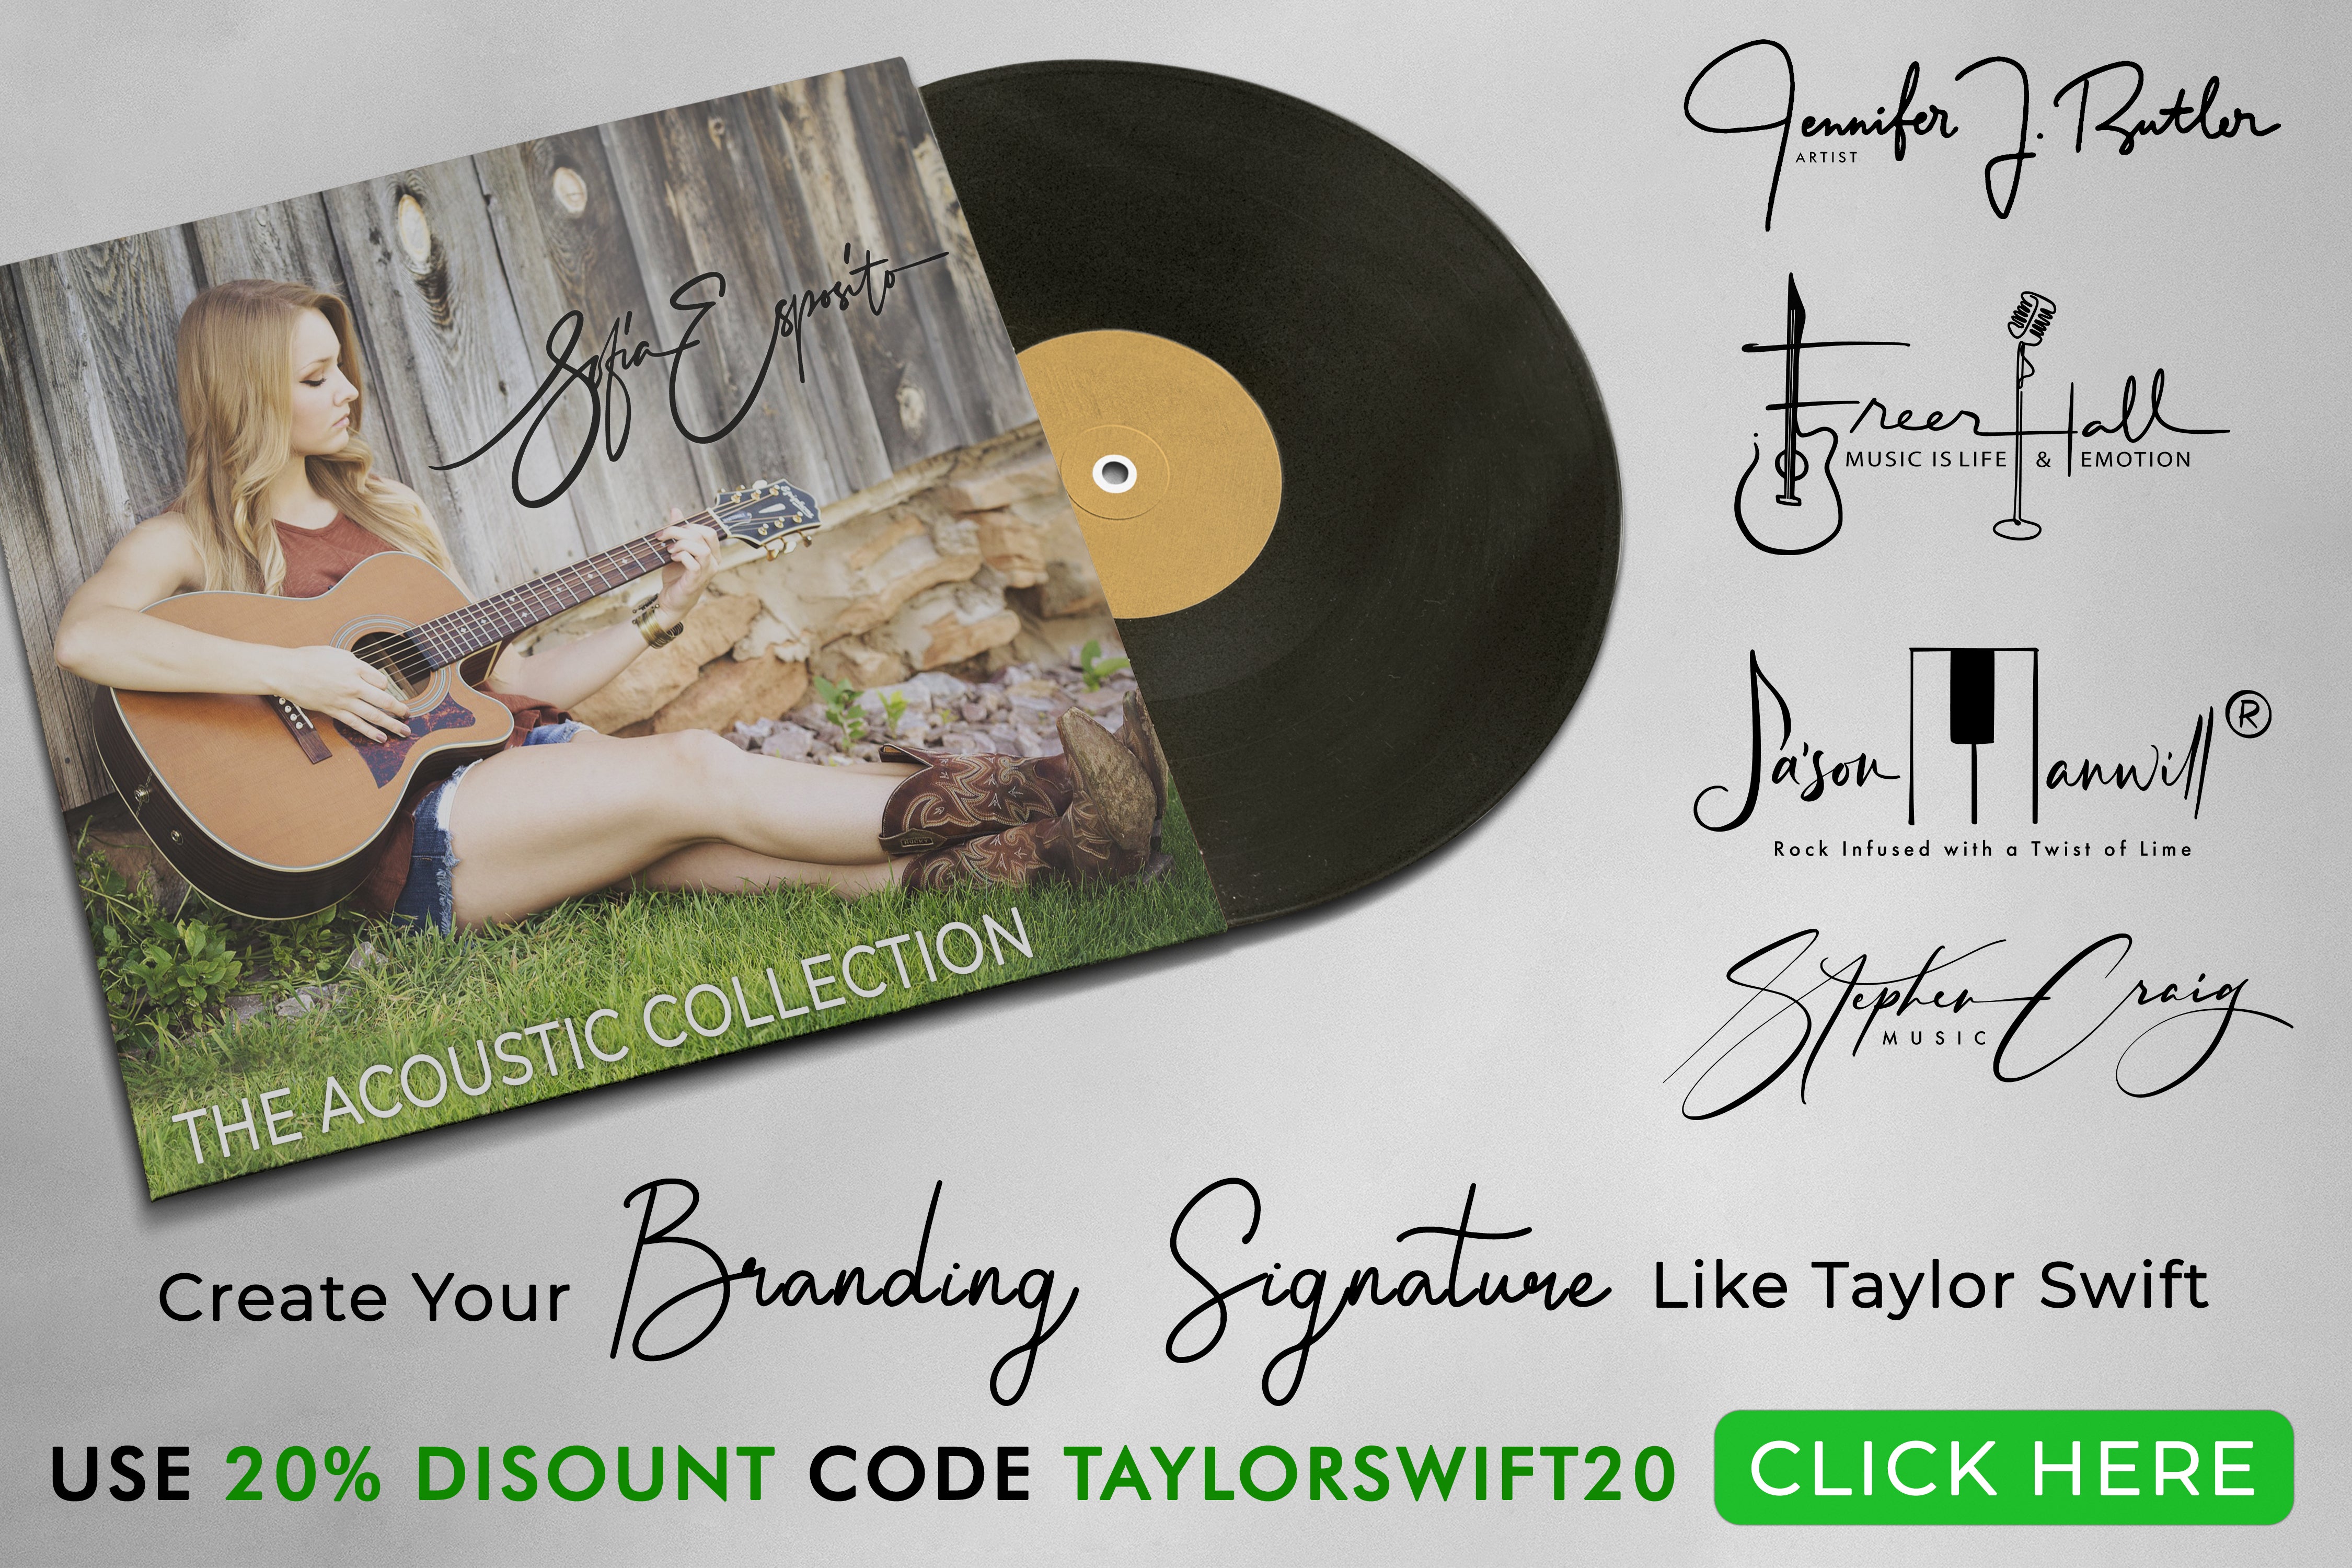 Taylor Swift Autograph: How Much Is It Worth?